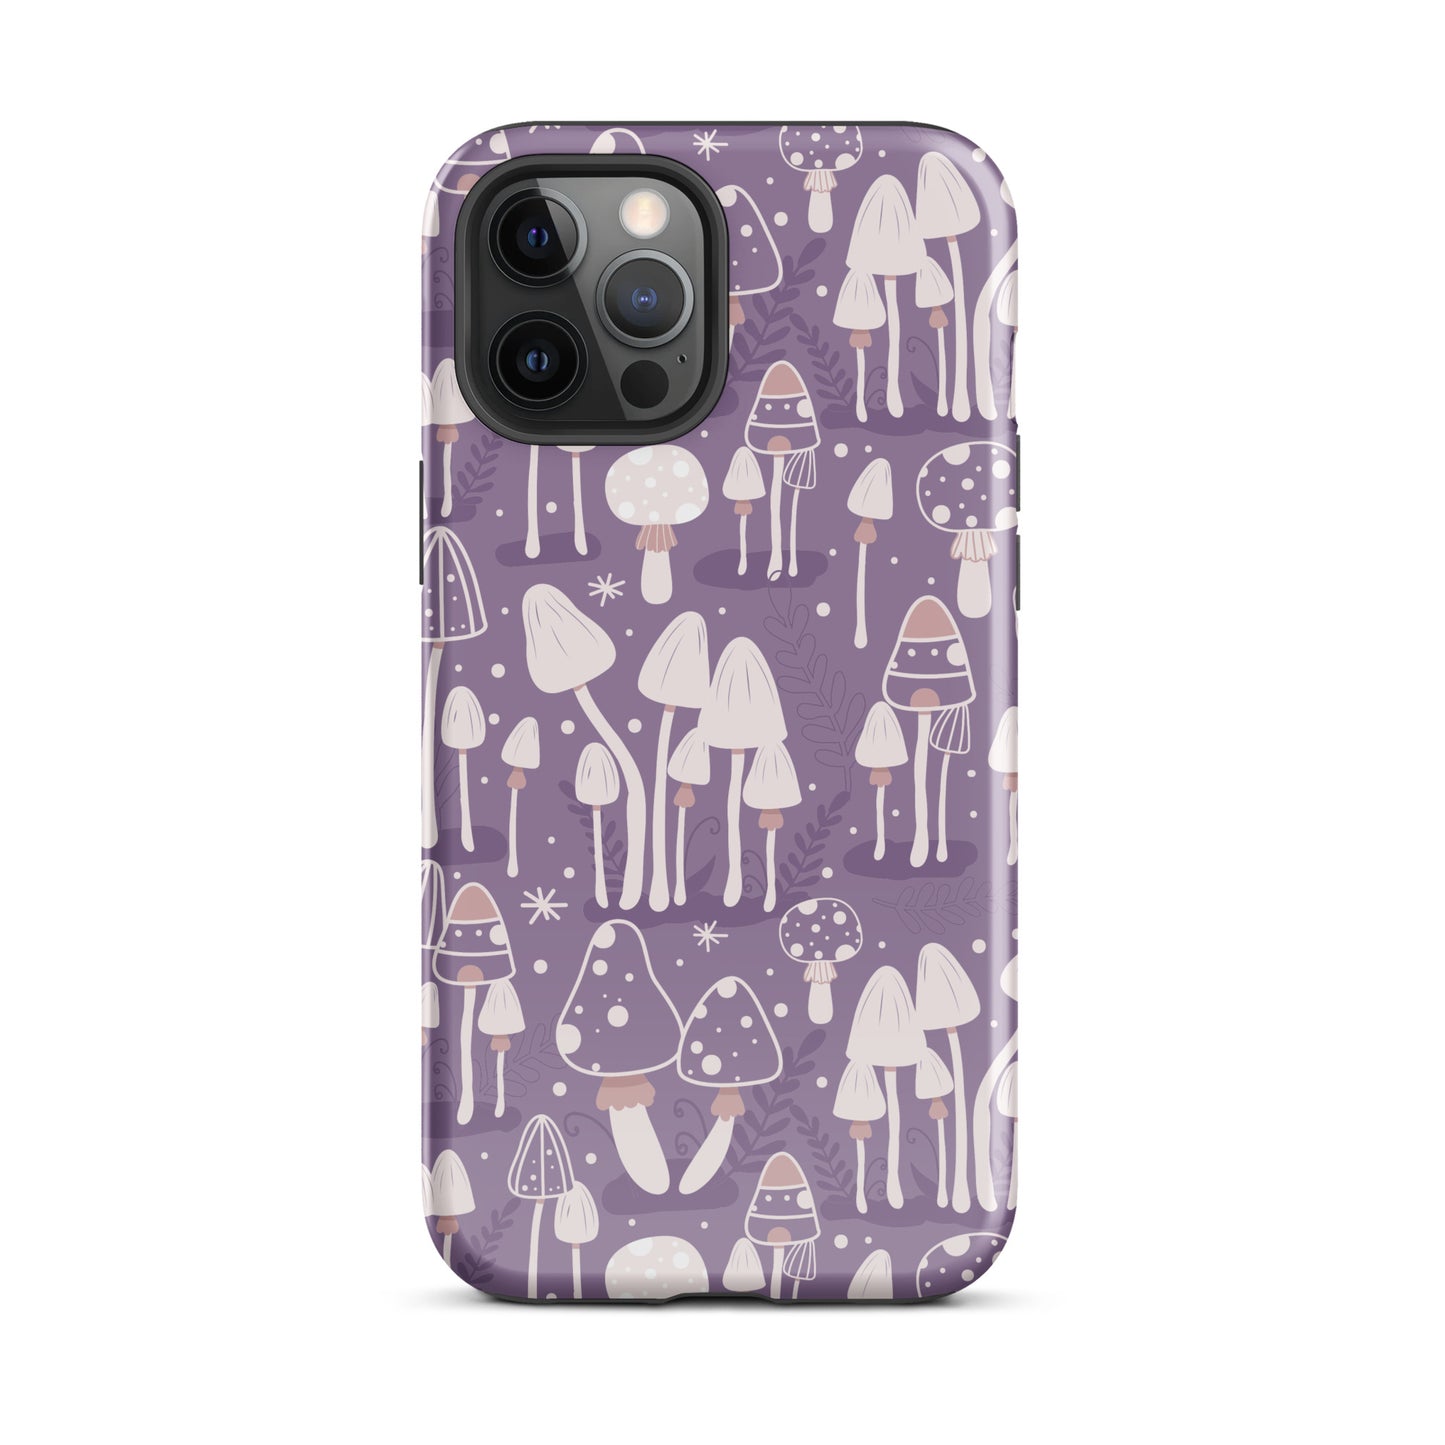 Mushroom Meadow iPhone Case iPhone 12 Pro Max Glossy